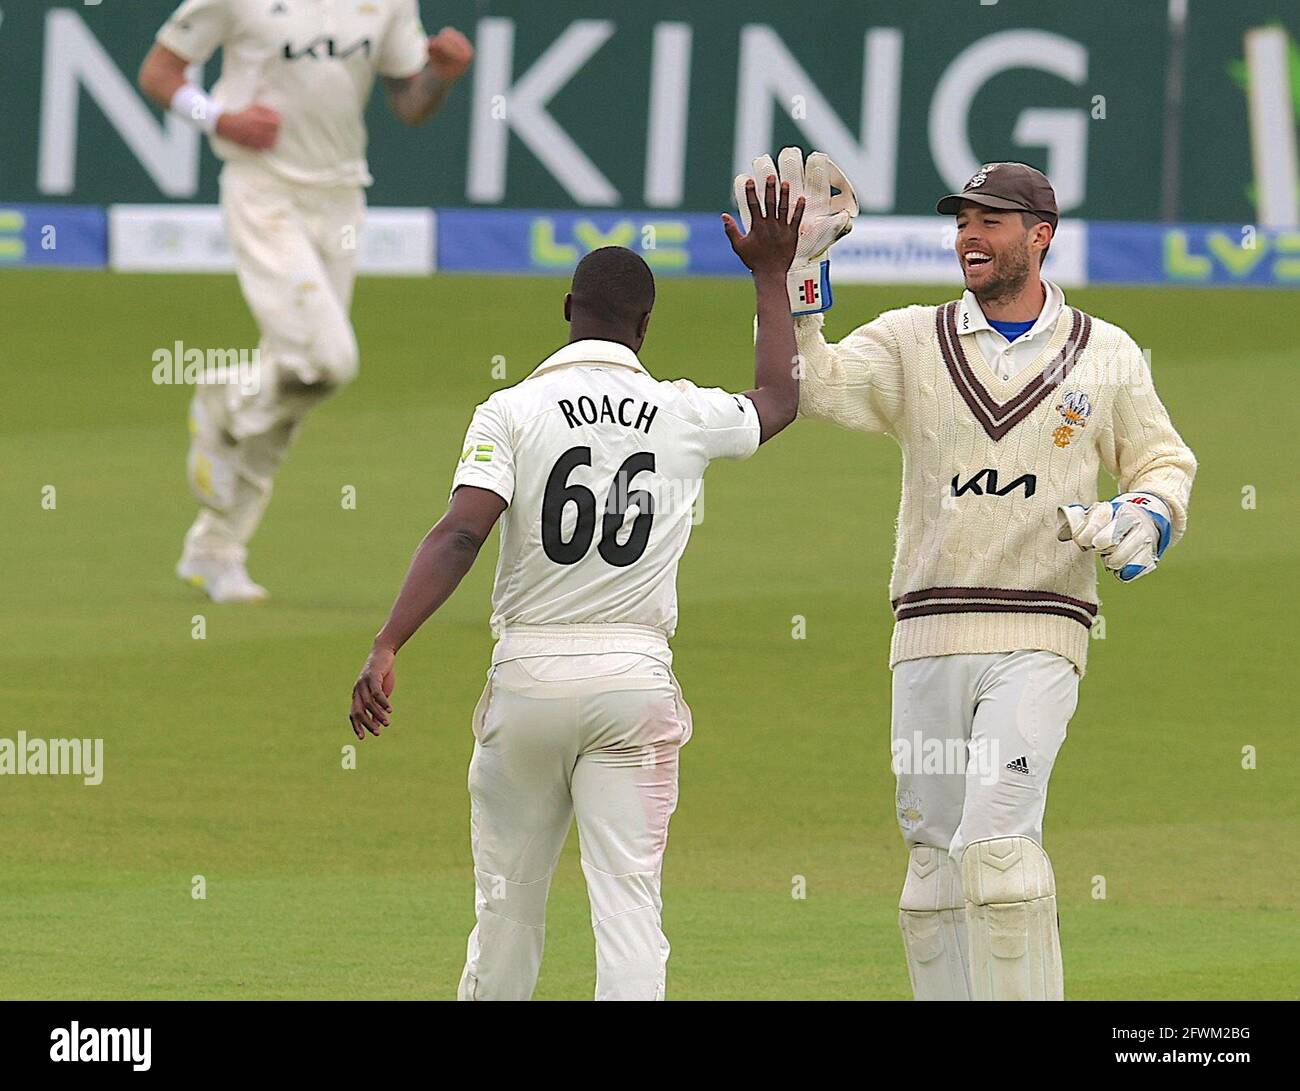 London, UK. 23 May, 2021. London, UK. Surrey’s Kemar Roach ends the day with Five wickets as Surrey take on Middlesex in  the County Championship at the Kia Oval, day four. David Rowe/Alamy Live News Stock Photo